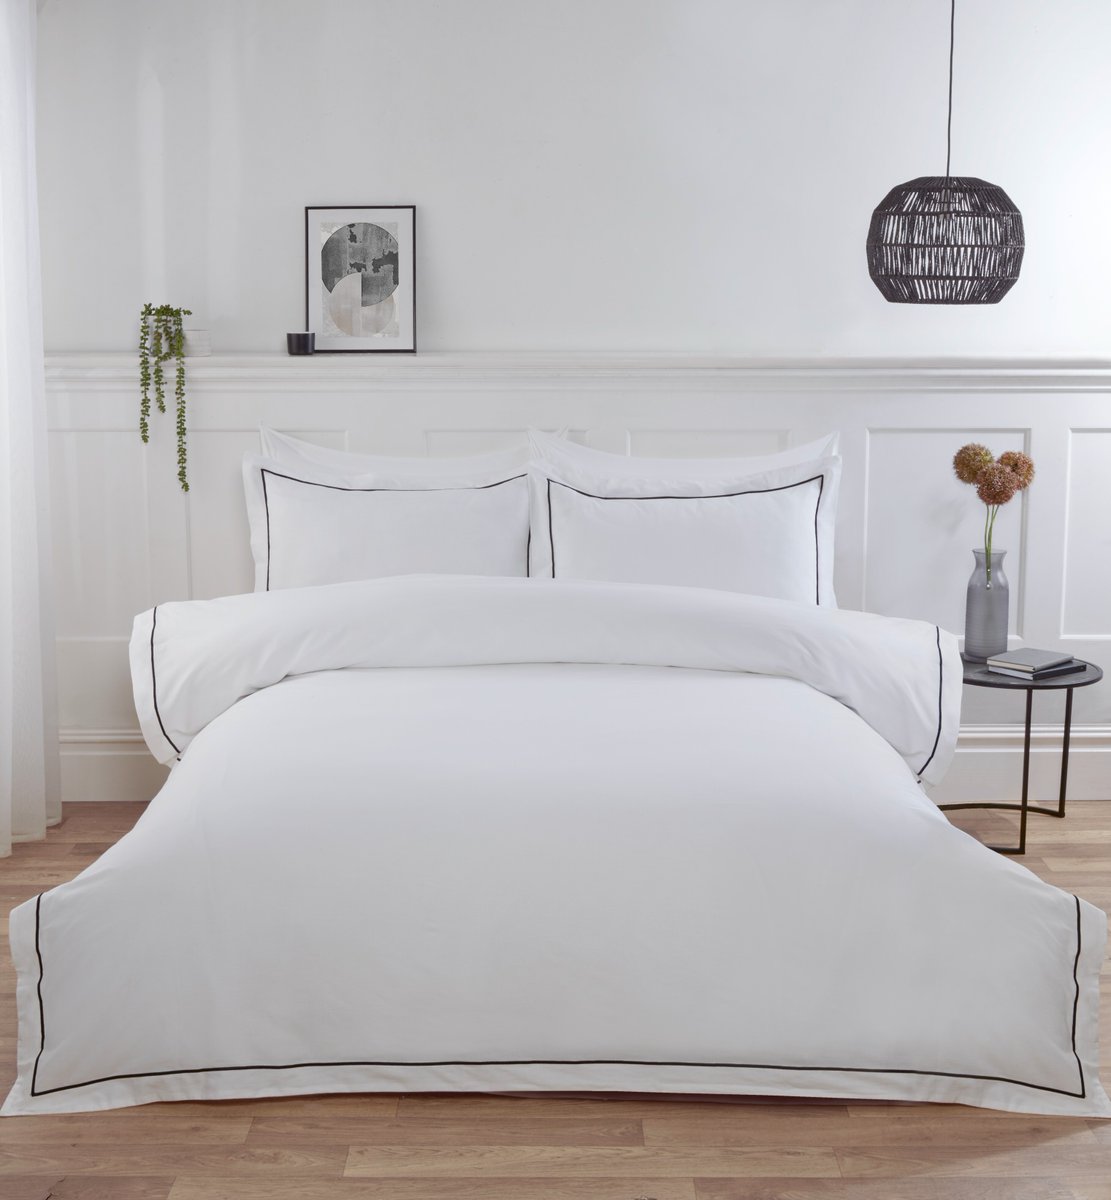 Here's something COOL 😍👇 💤 Oxford Bamboo Bedding Set crafted from bamboo and cotton blend to make it breathable, comfortable & so so soft - the perfect set for summer nights! ❄️ bit.ly/3UpTjbA